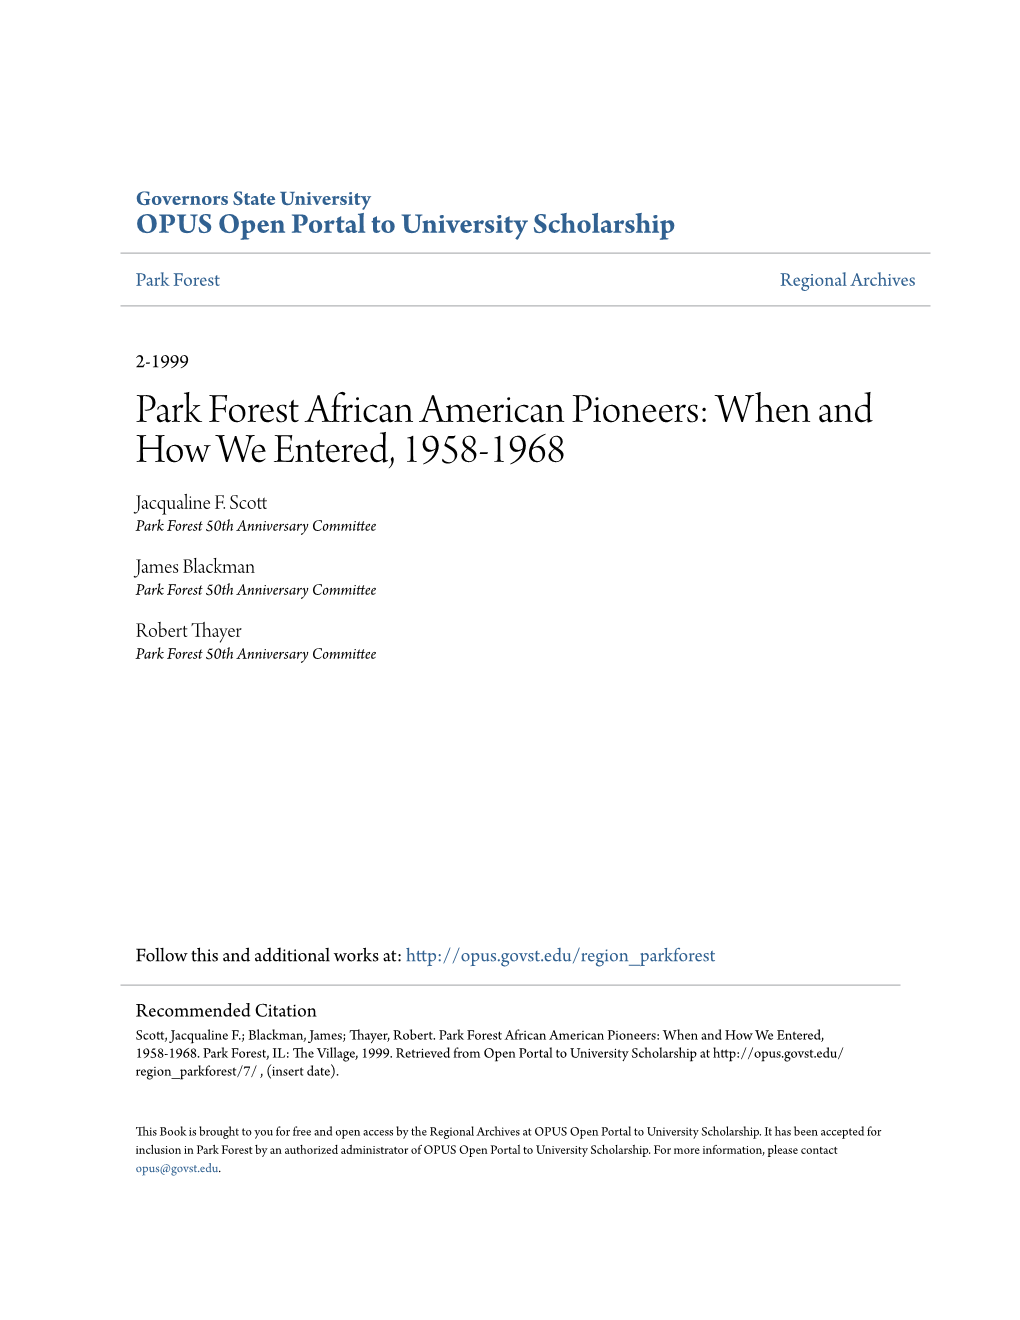 Park Forest African American Pioneers: When and How We Entered, 1958-1968 Jacqualine F